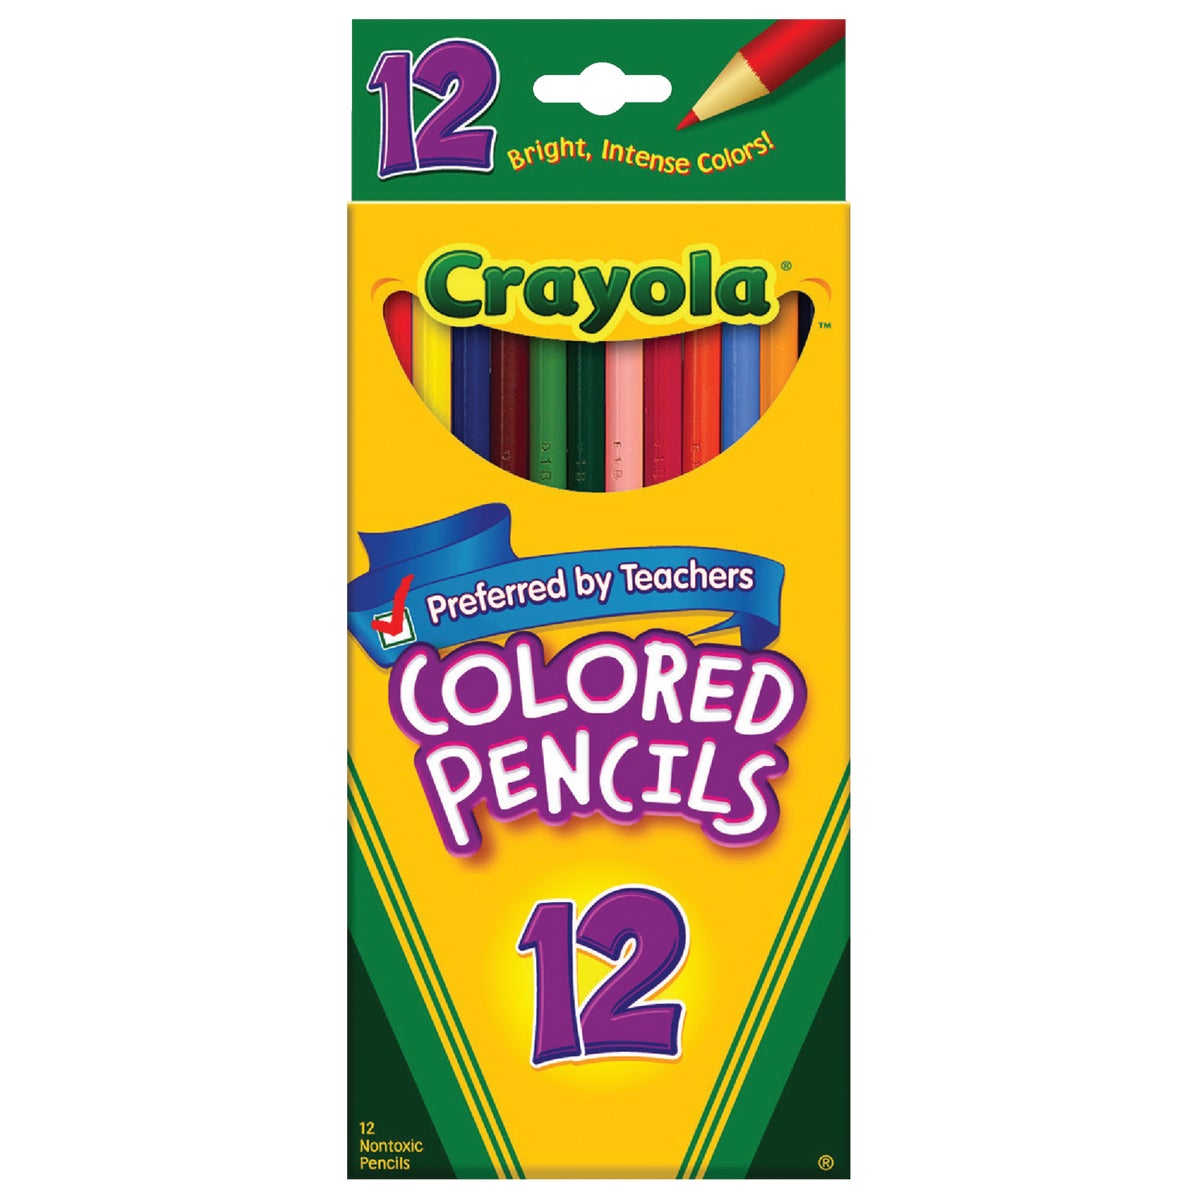 Item 970689, Long pencils in assorted colors in a peggable package.